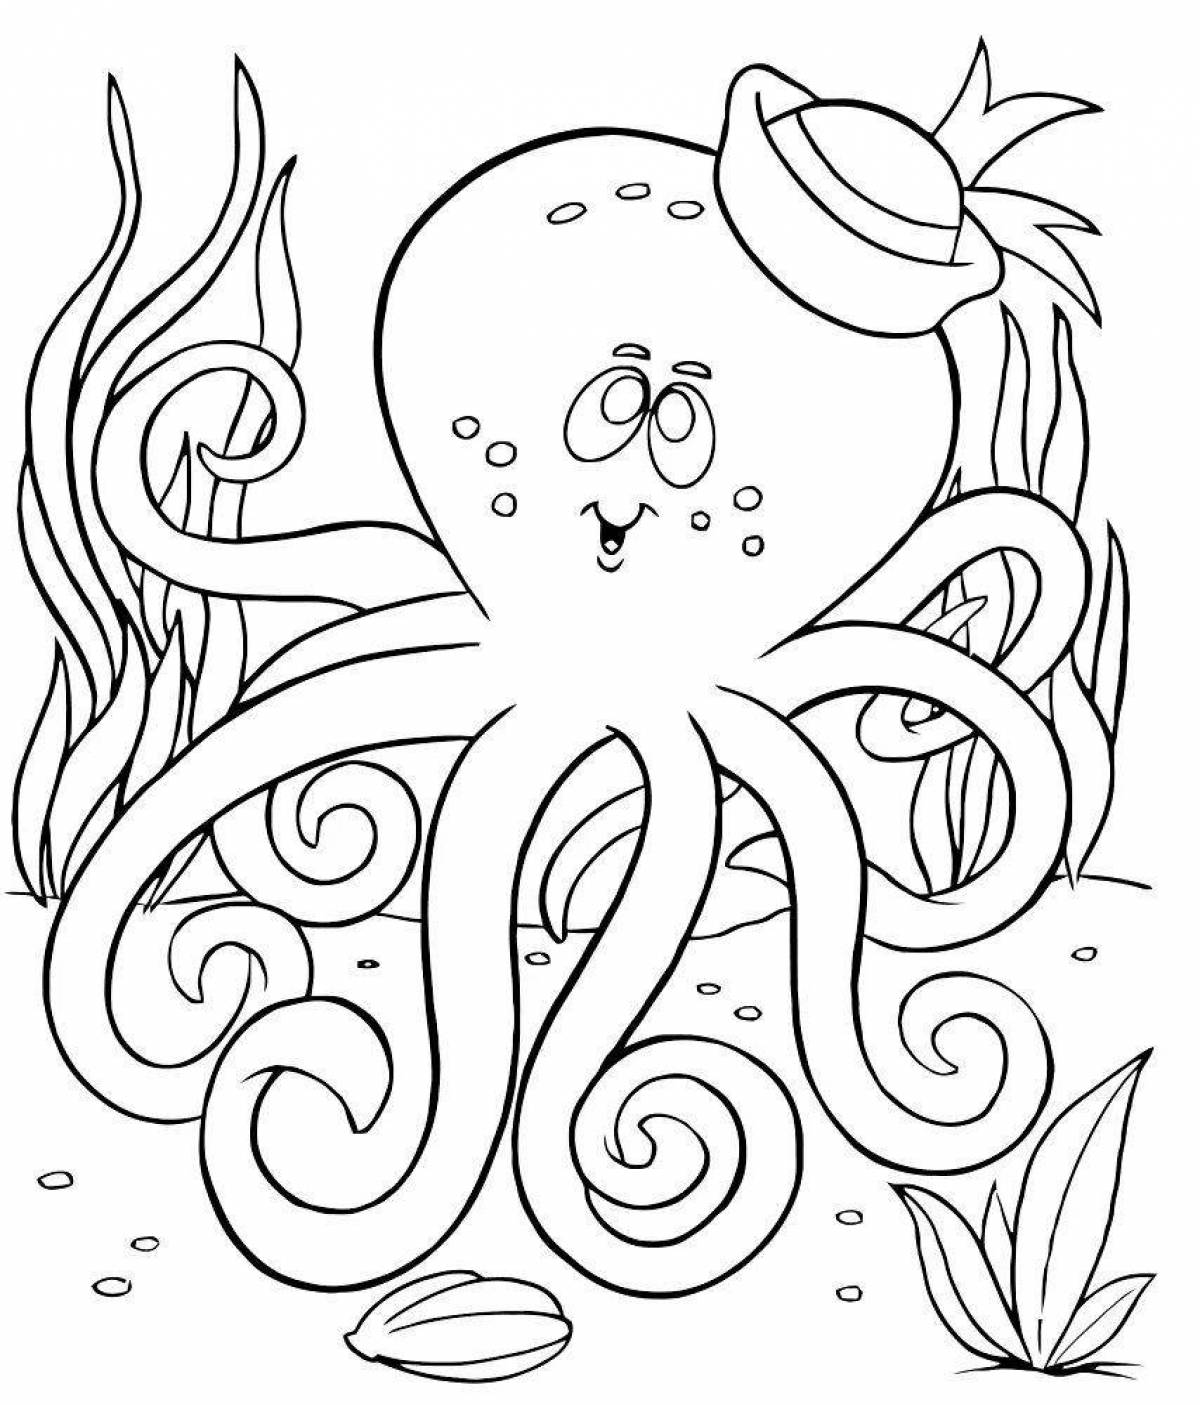 Amazing underwater world coloring for kids